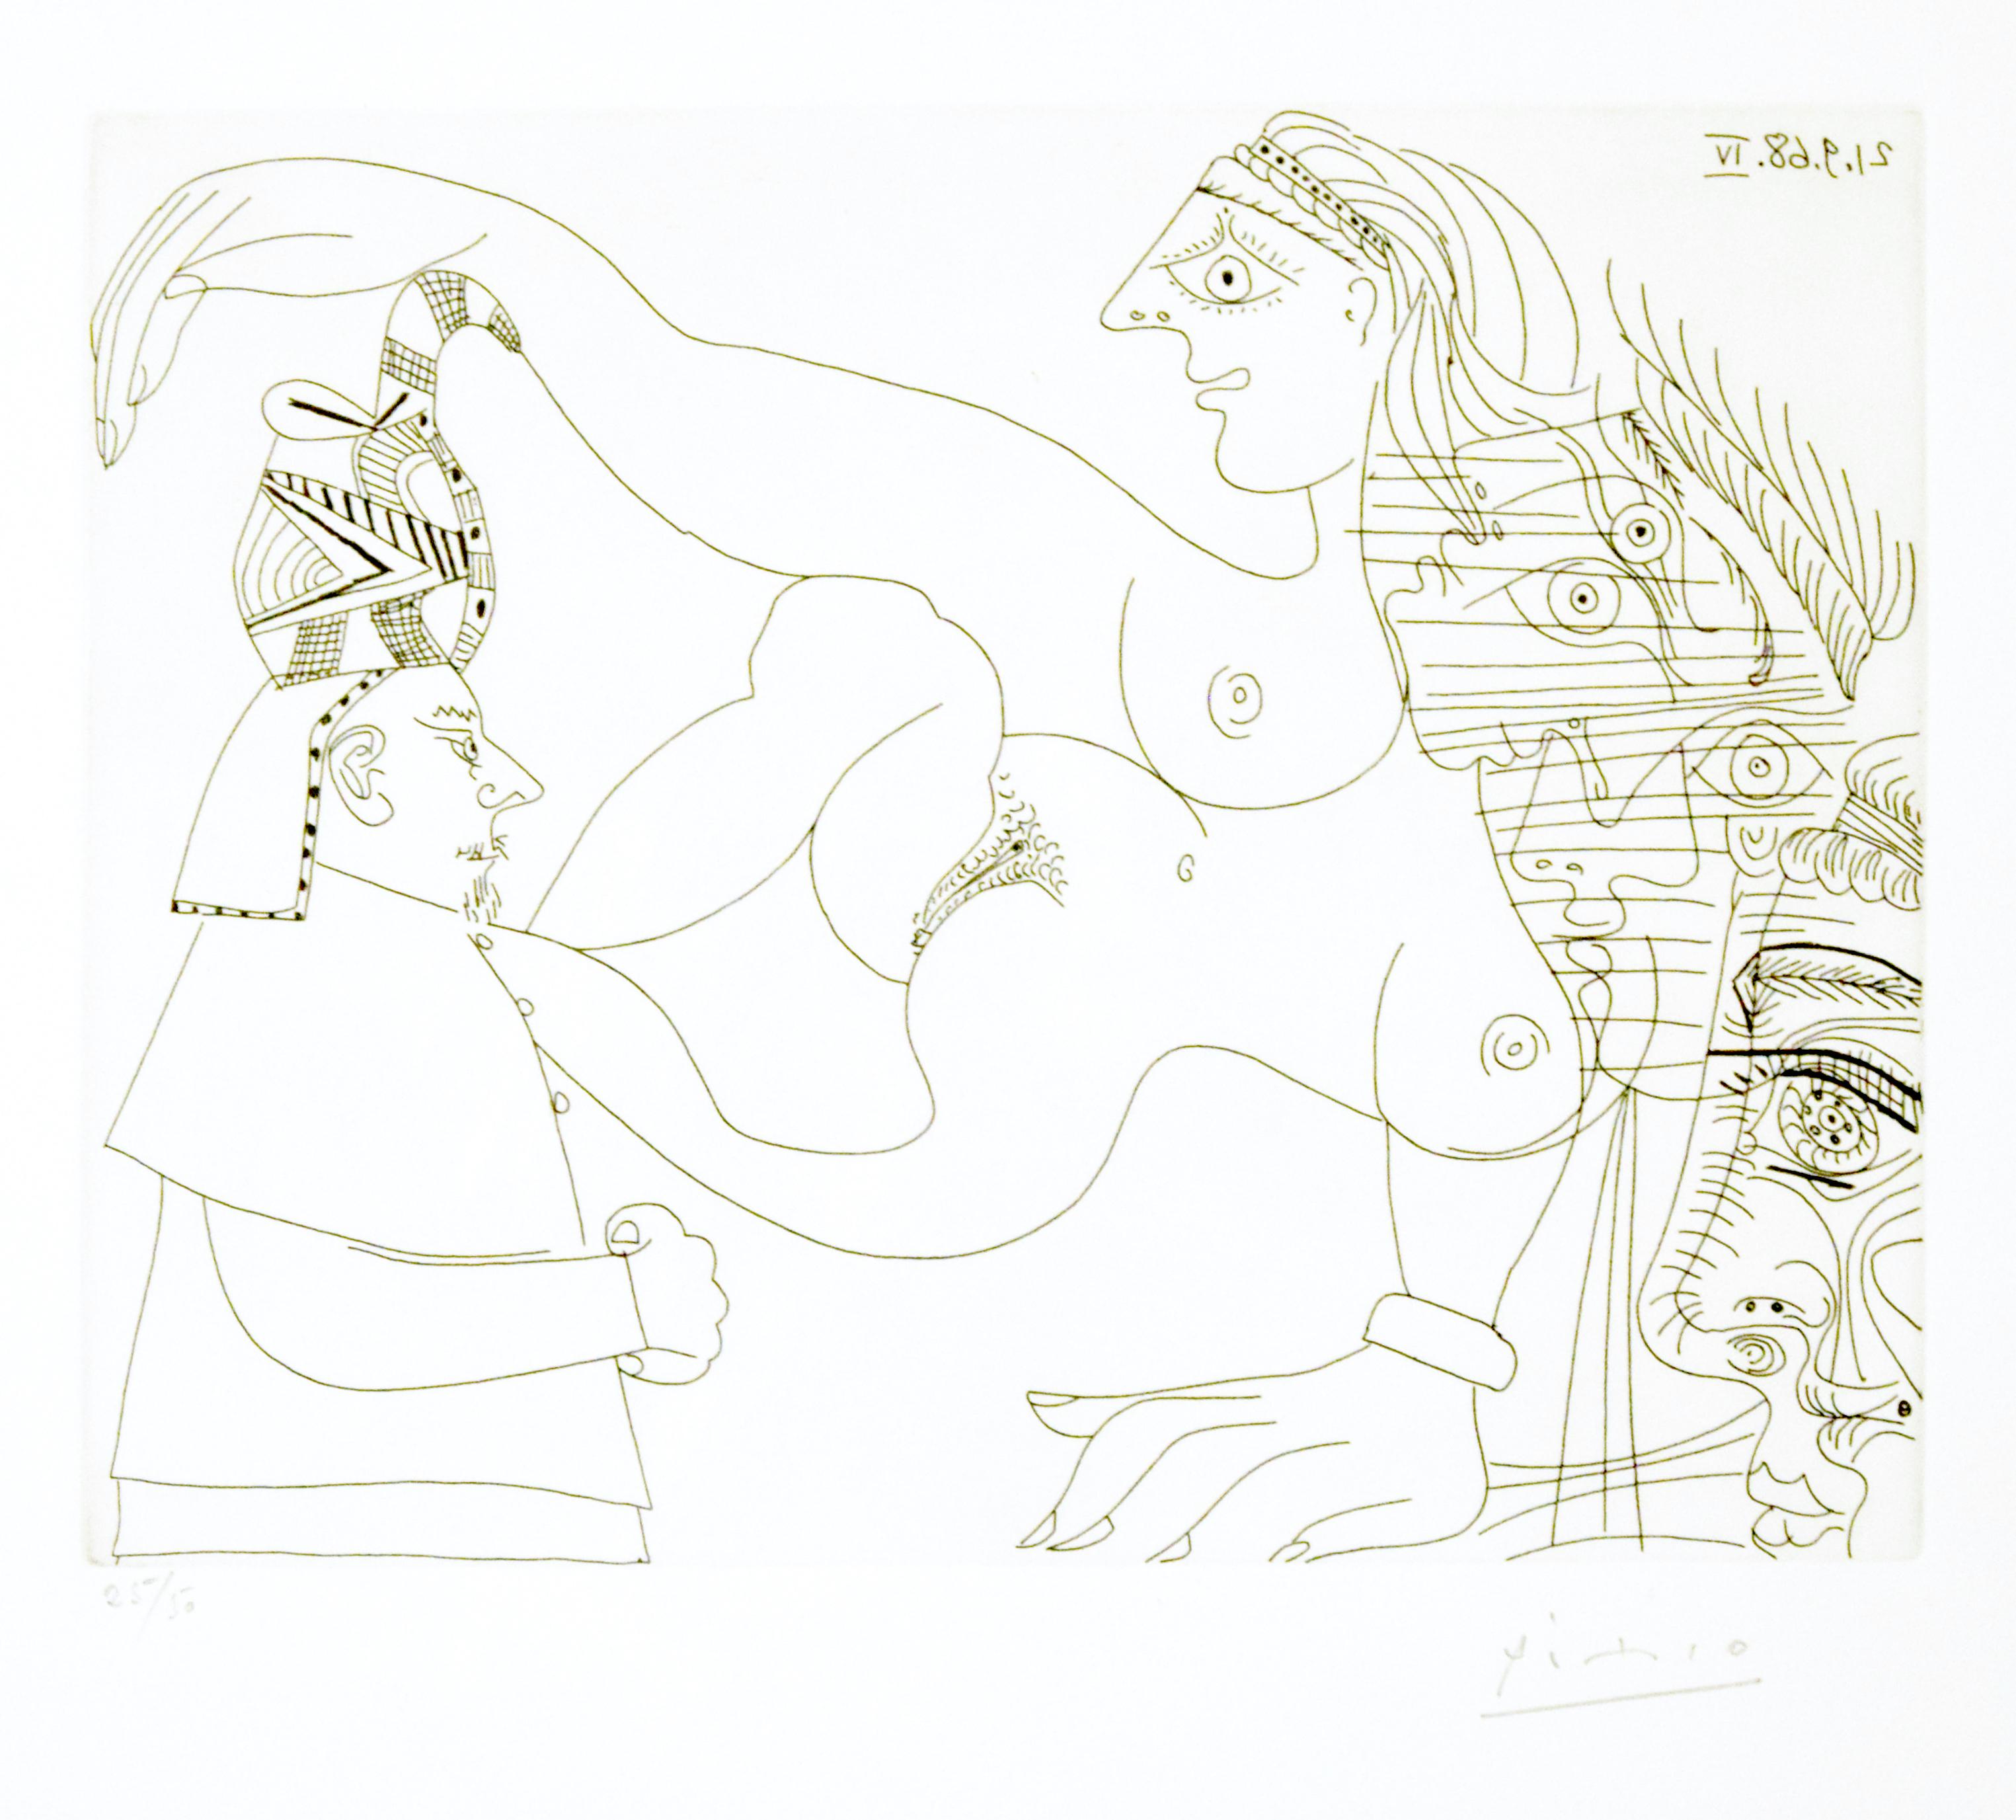 Egyptien et femmes, plate 331 from “Series 347” is an amazing and precious b/w etching on paper realized in 1968 by Pablo Picasso. Signed in pencil, numbered out of 50 (there were also 17 artist’s proofs), printed by Crommelynck, Paris, published by